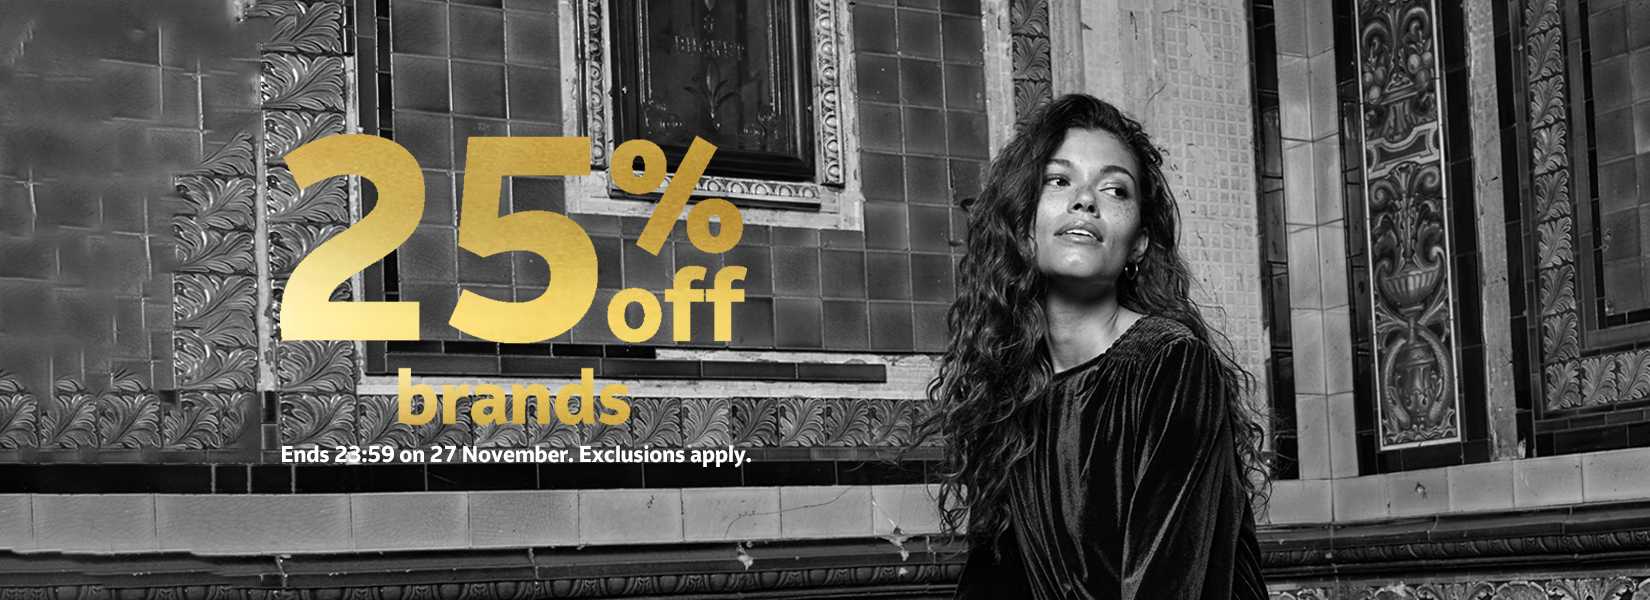 25% off branded clothing. Offer ends 23:59 on 27th November. Exclusions apply.